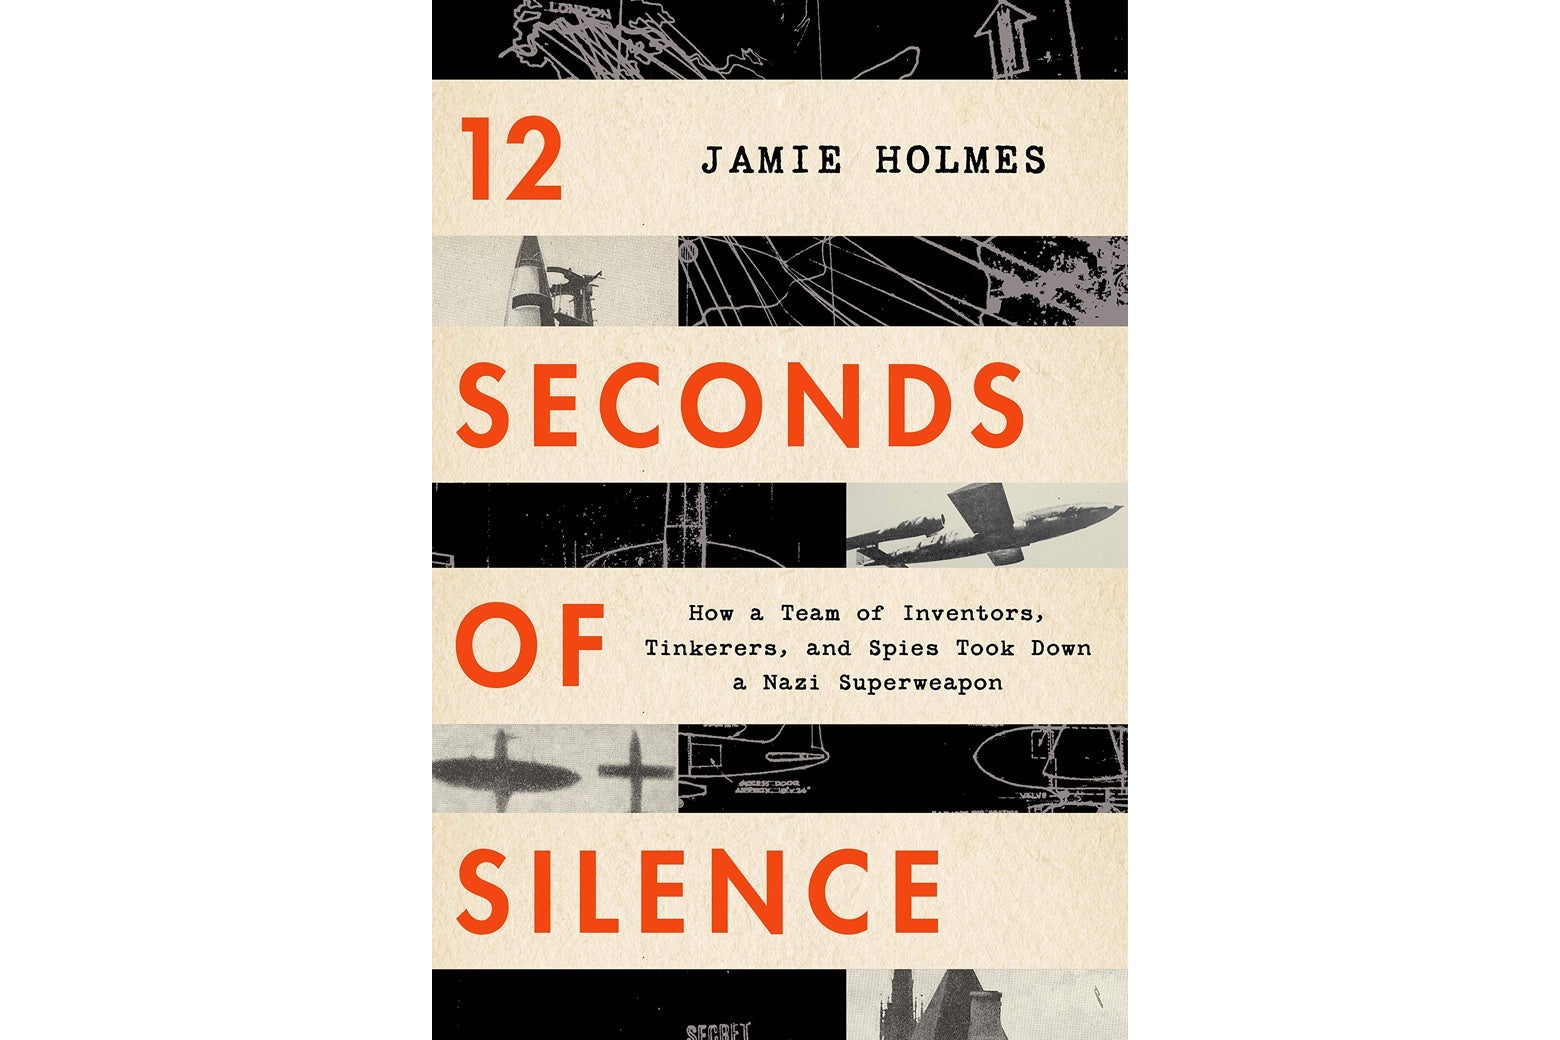 Book cover of 12 Seconds of Silence.